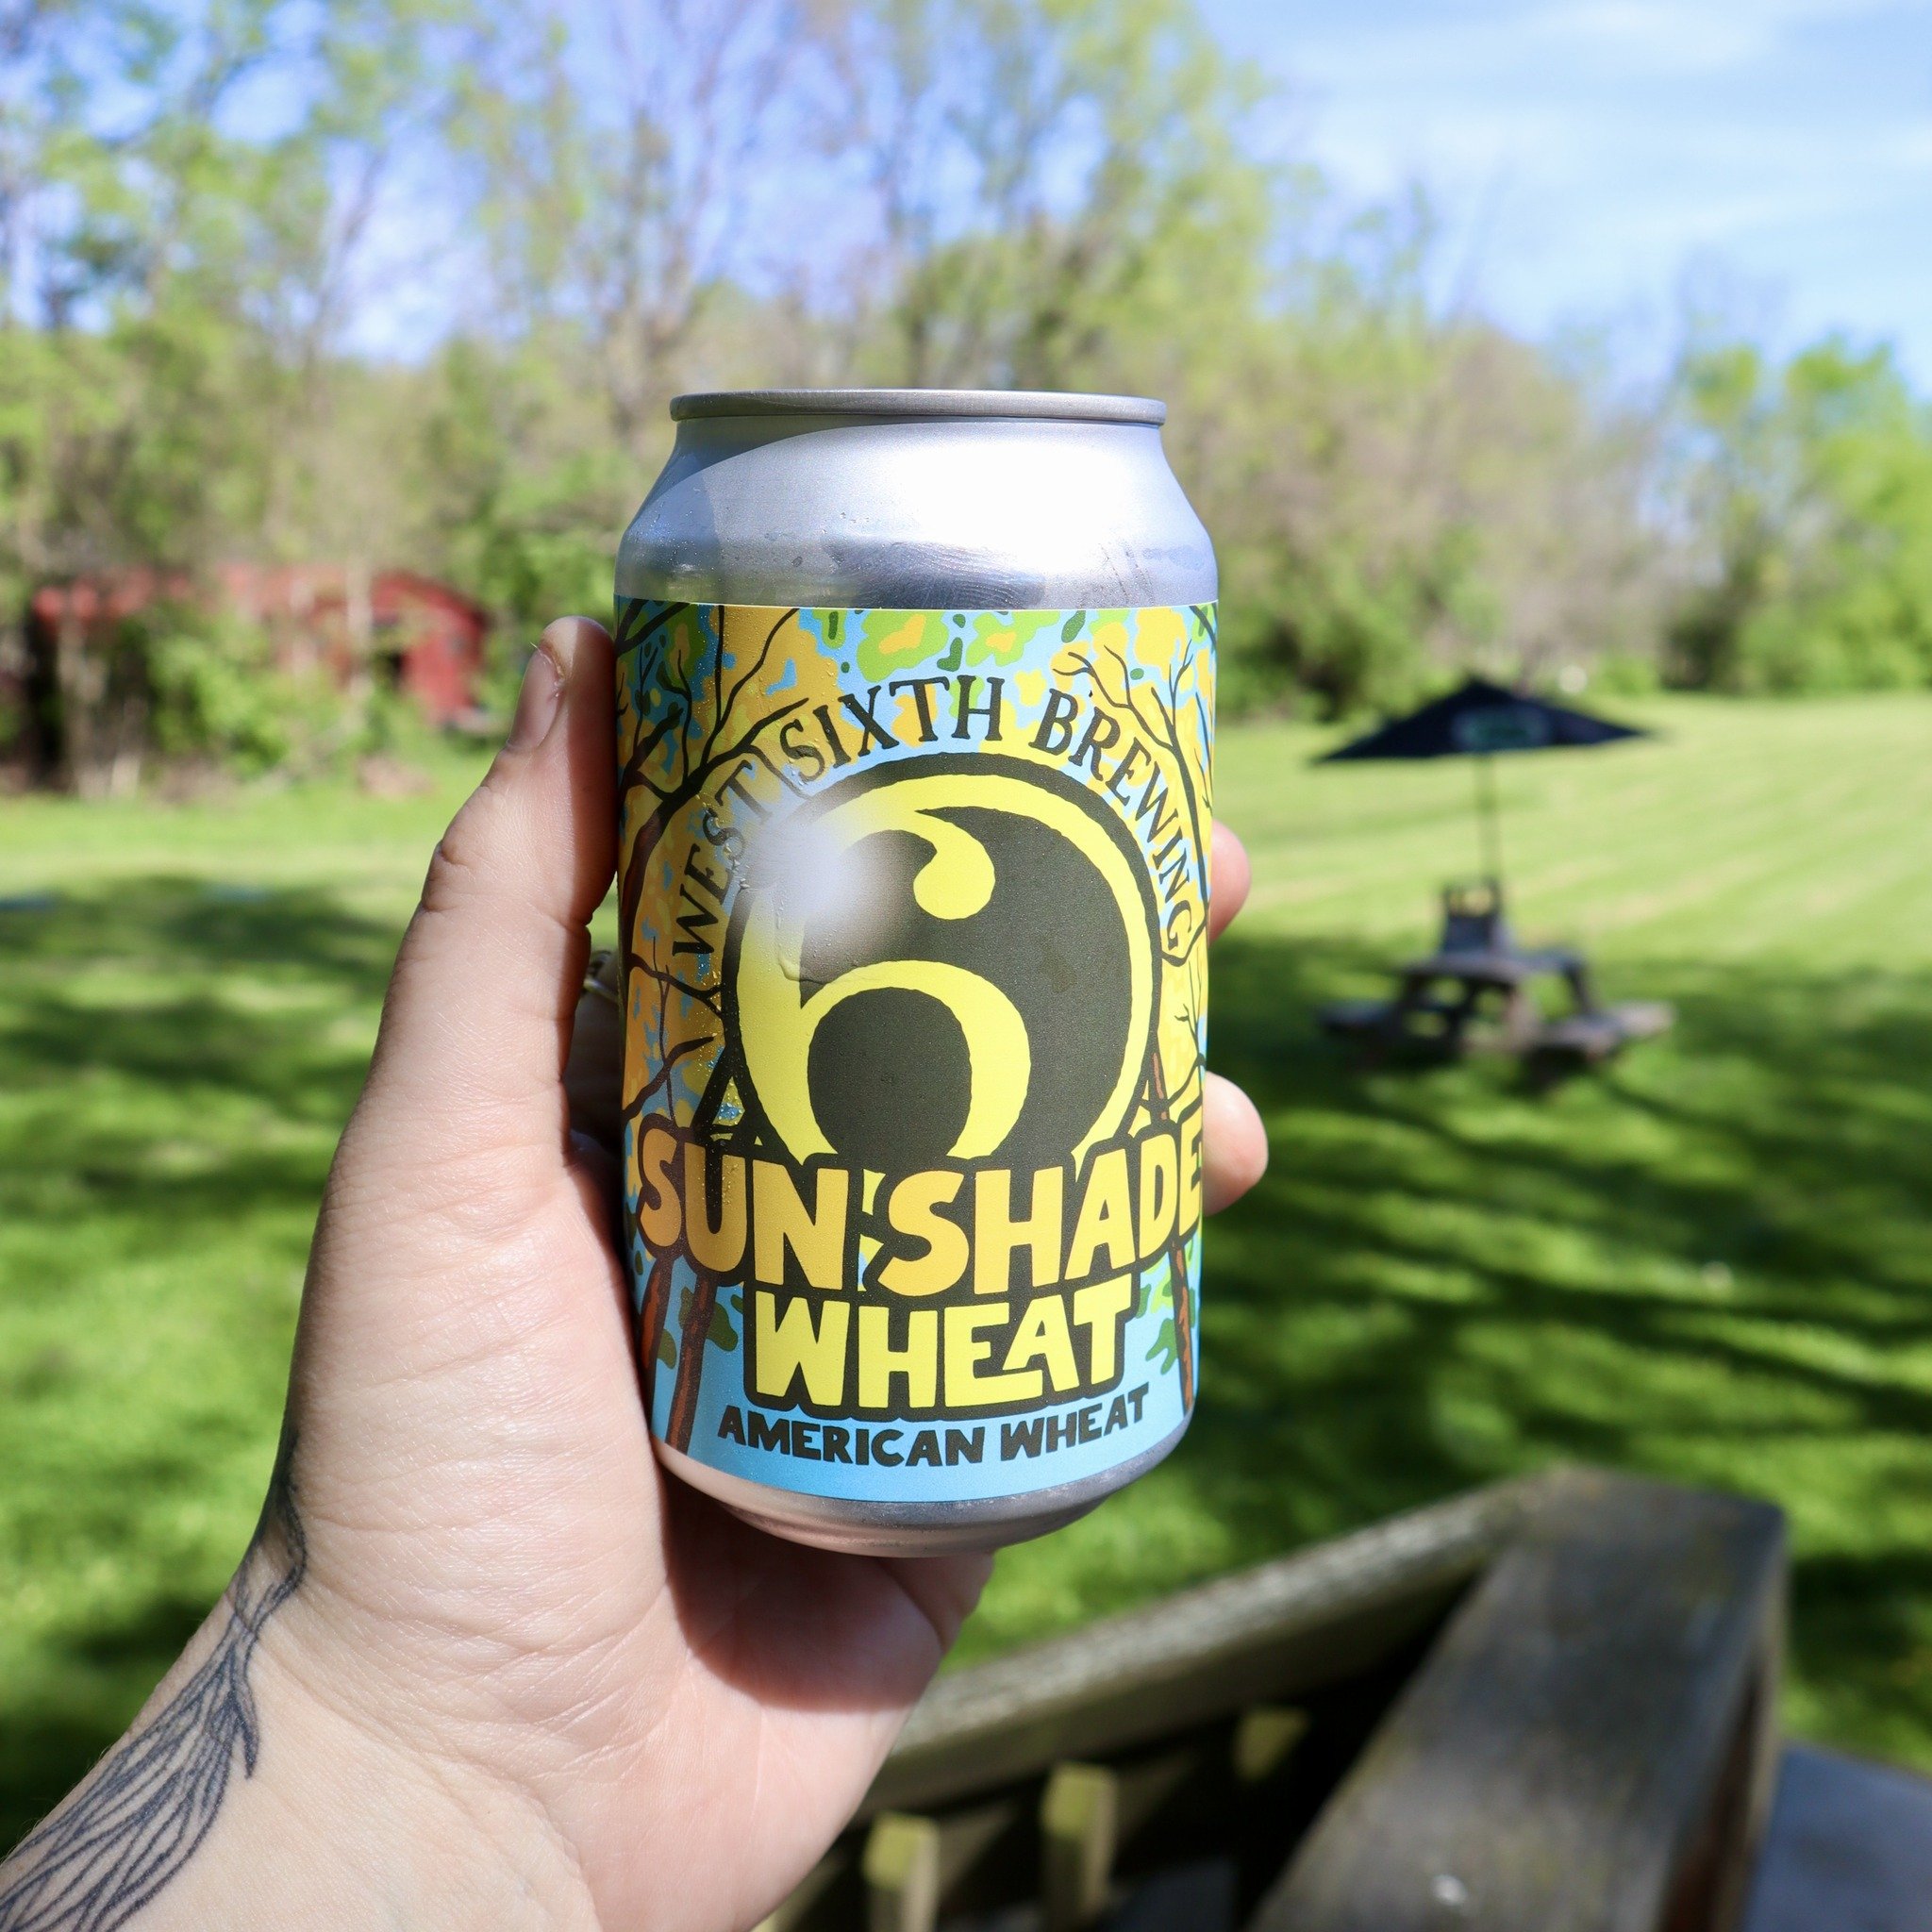 Cheers to the sunny days, the old shade trees on our scenic byway, and the great local beer to drink under them. Happy Derby Week, y'all!
Join us on Saturday for a big ol party - check the link in our bio!